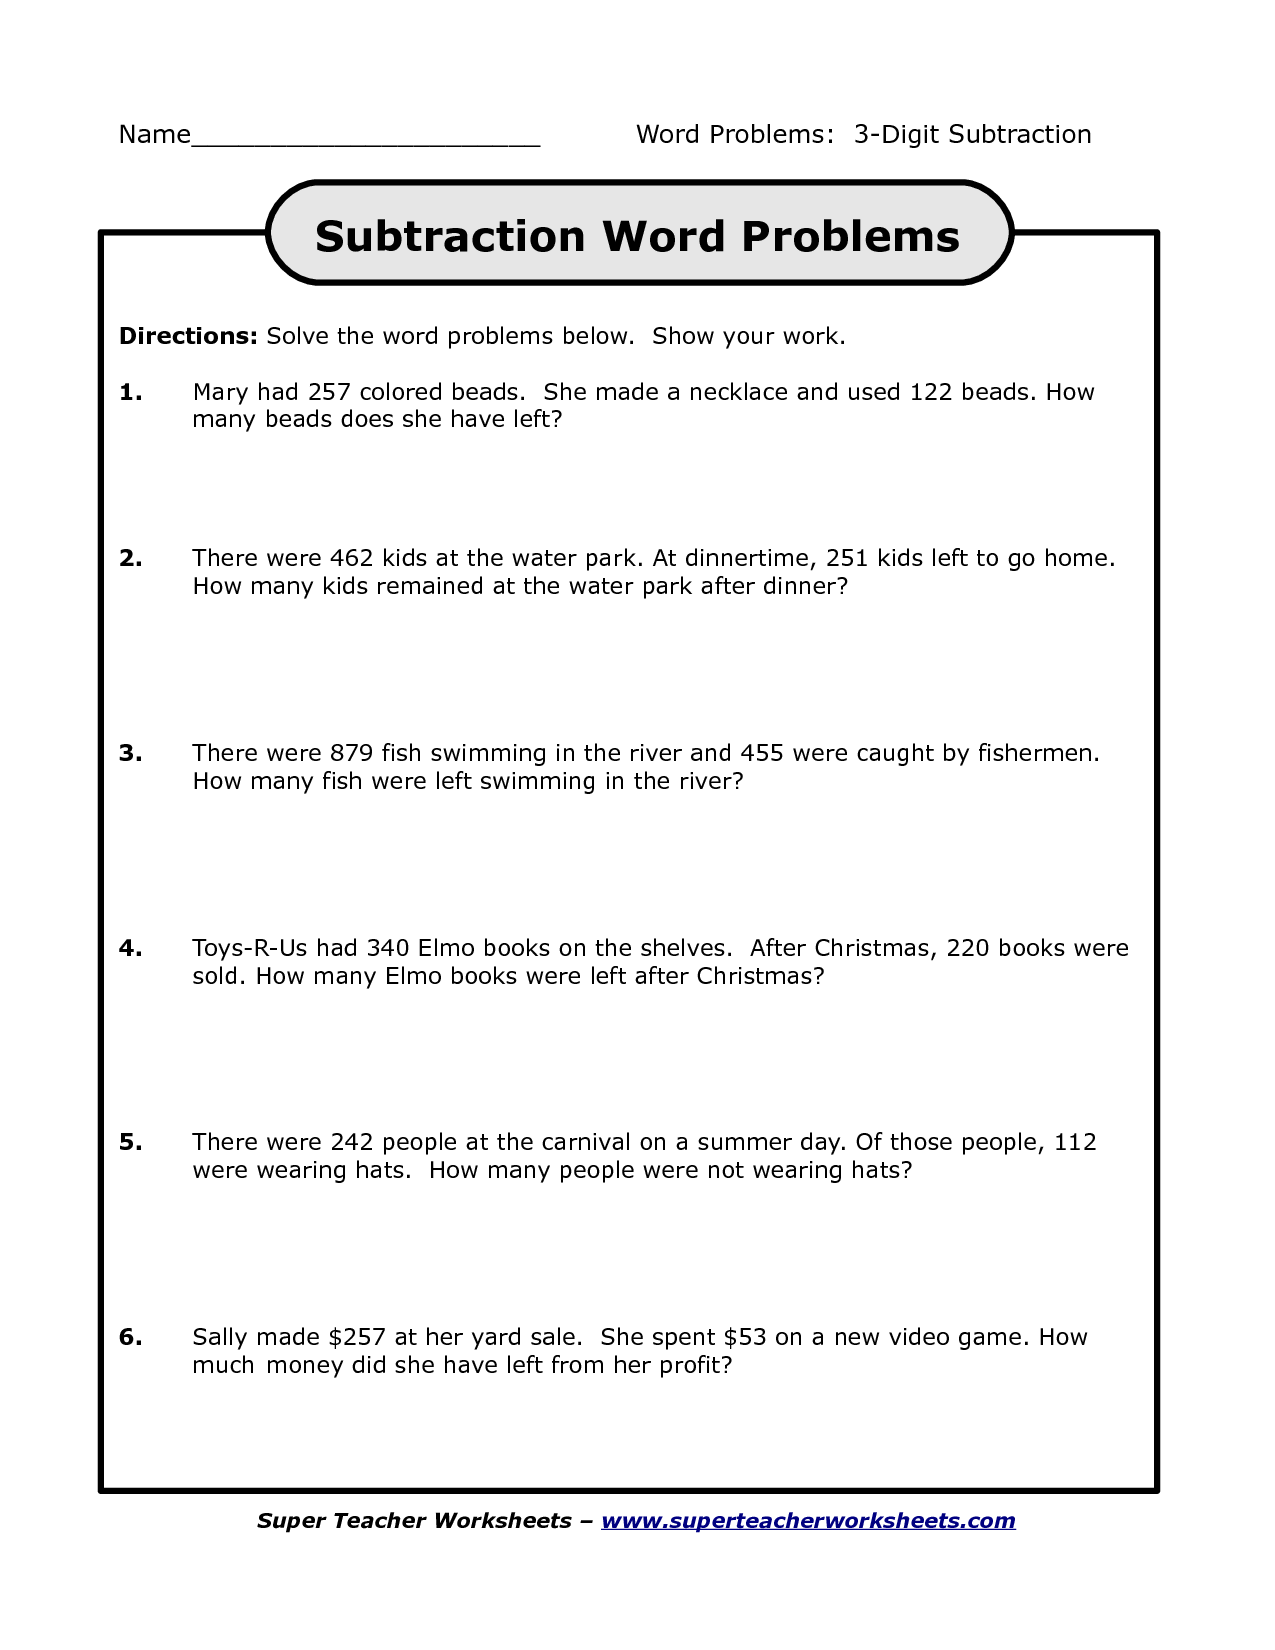 Subtraction Word Problems Worksheets Image